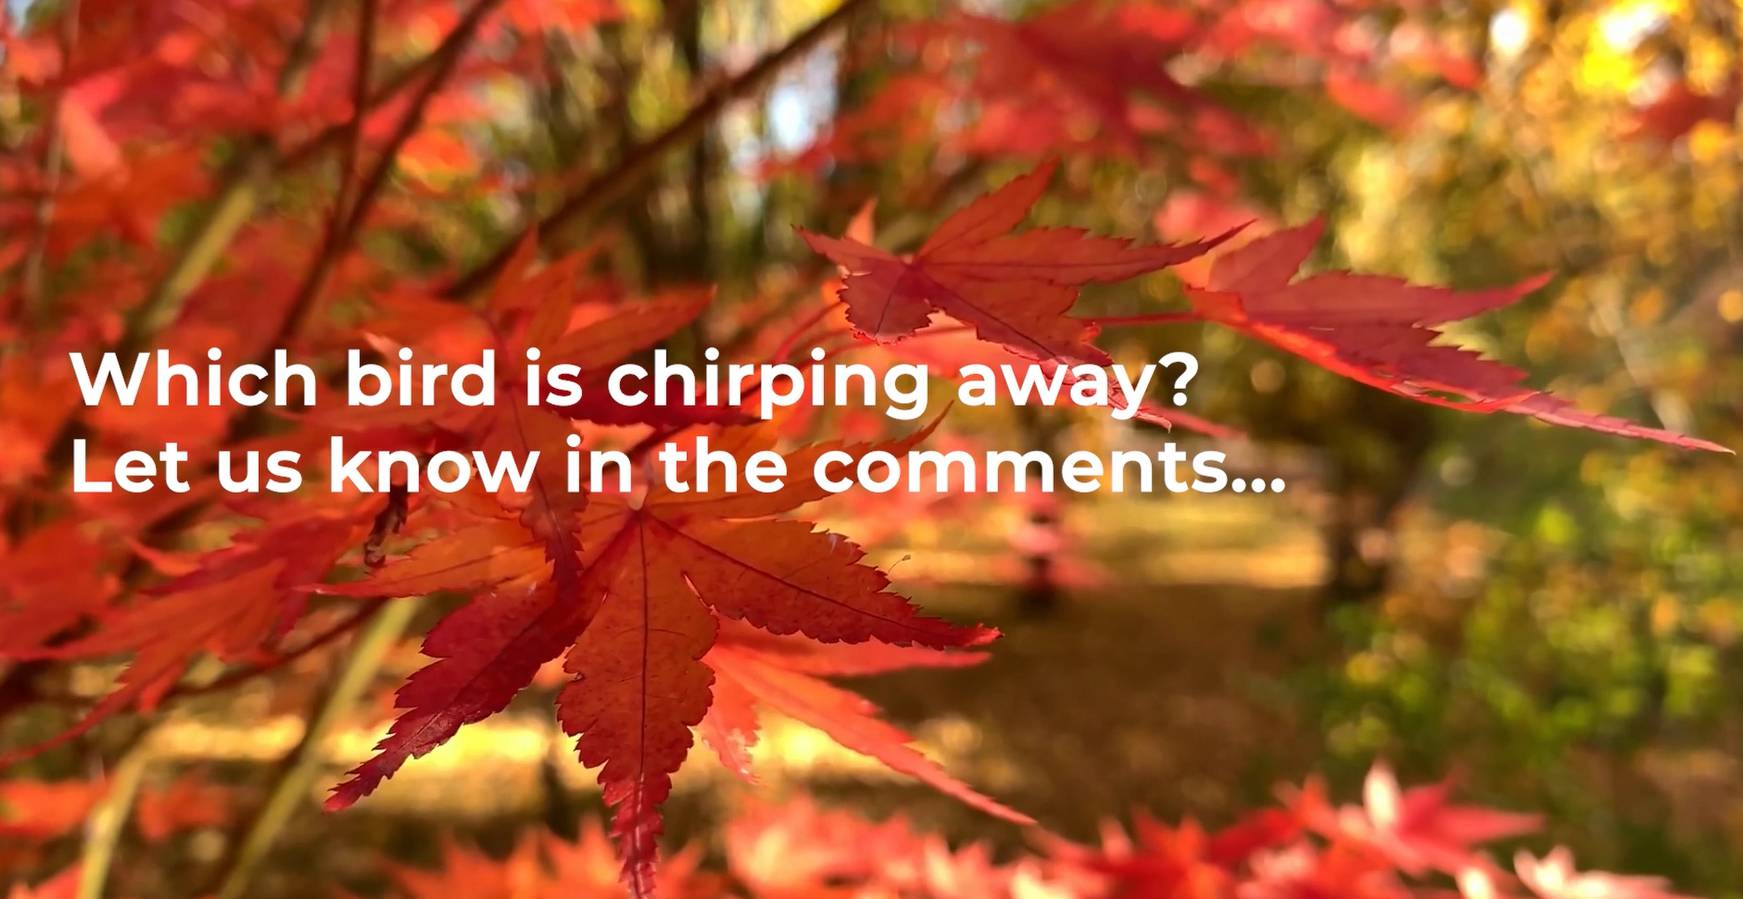 Which bird is chirping away?